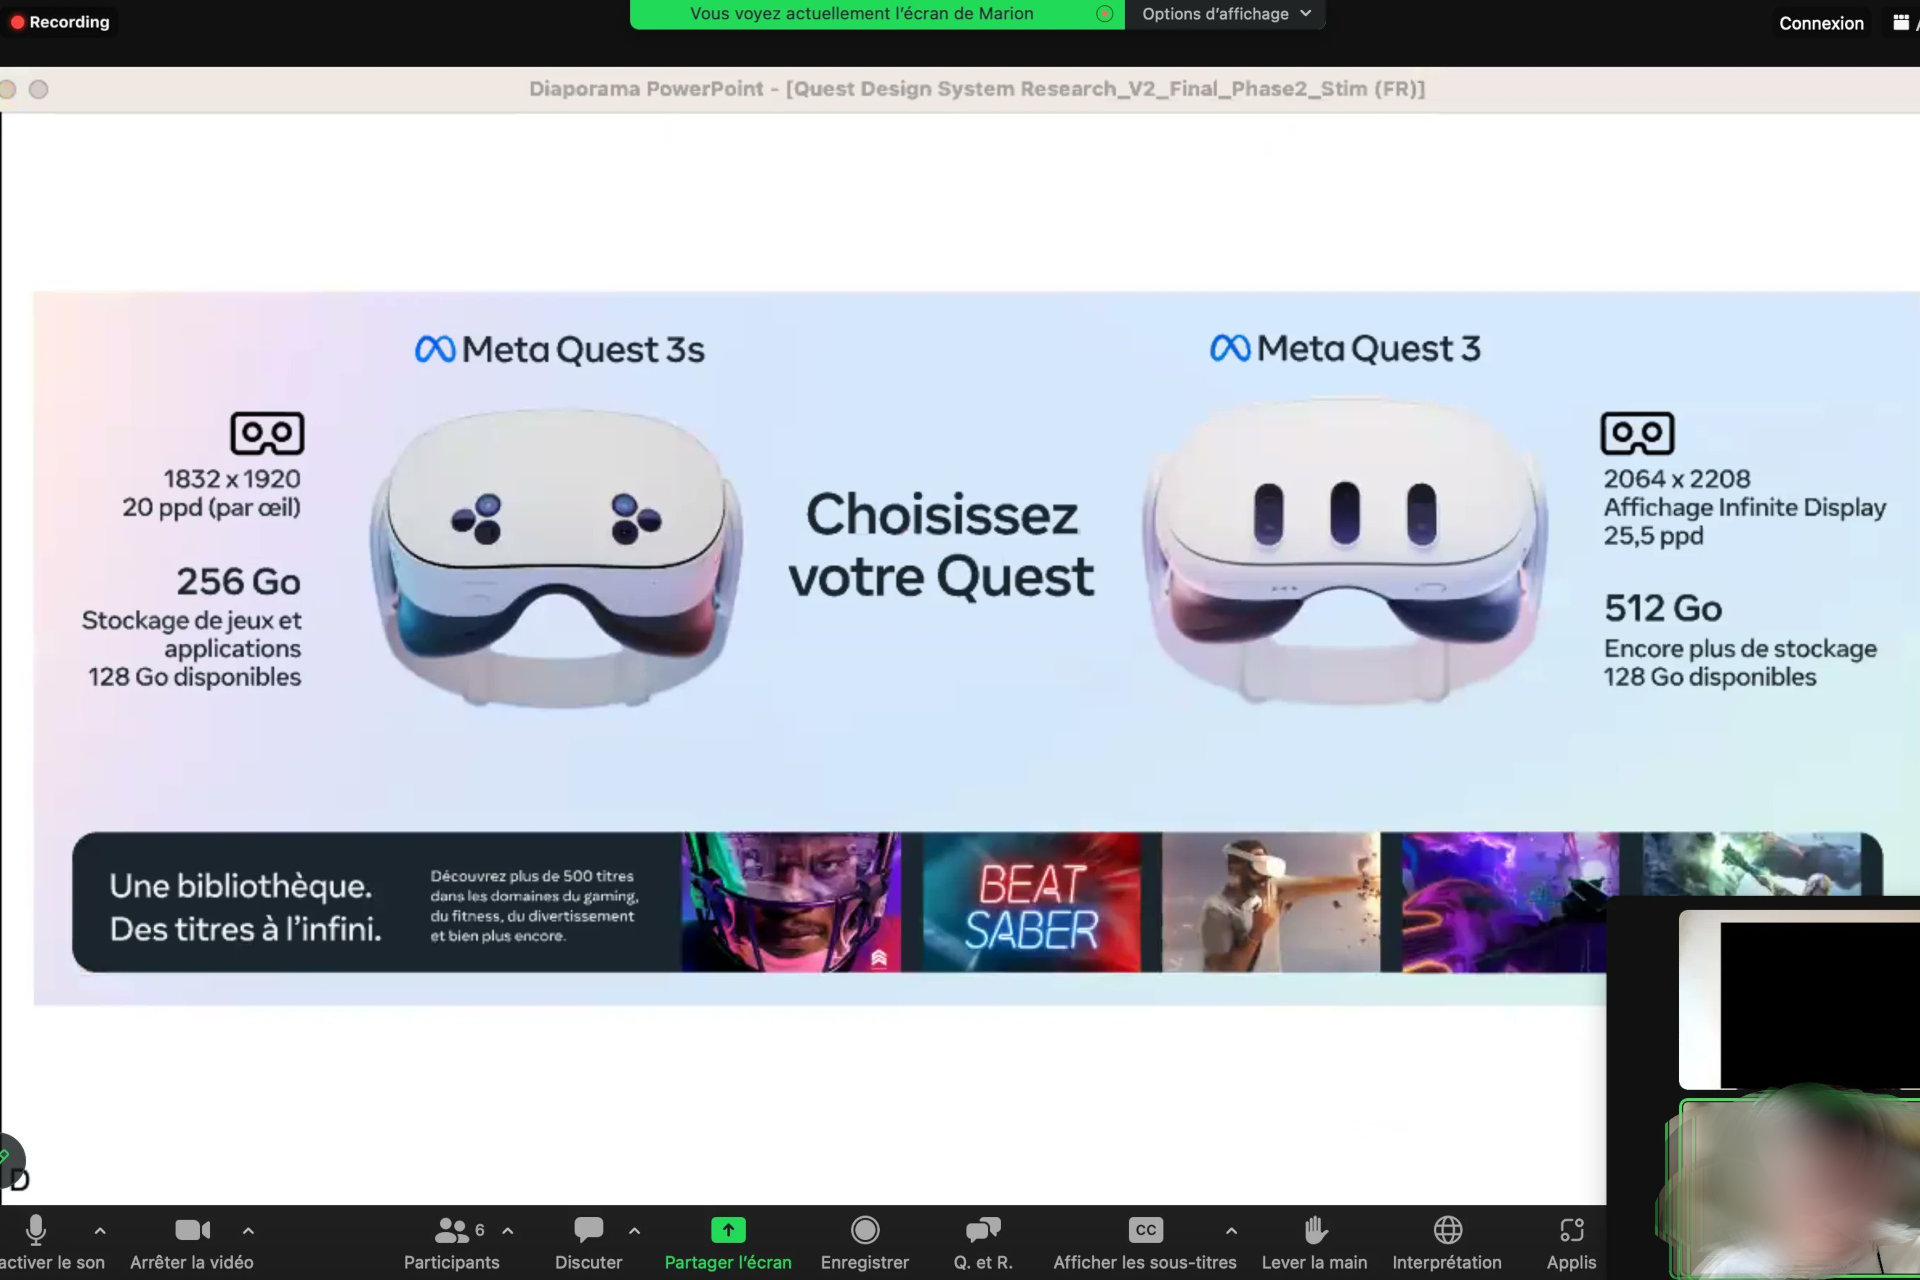 A leaked image compares Quest 3S and Quest 3.